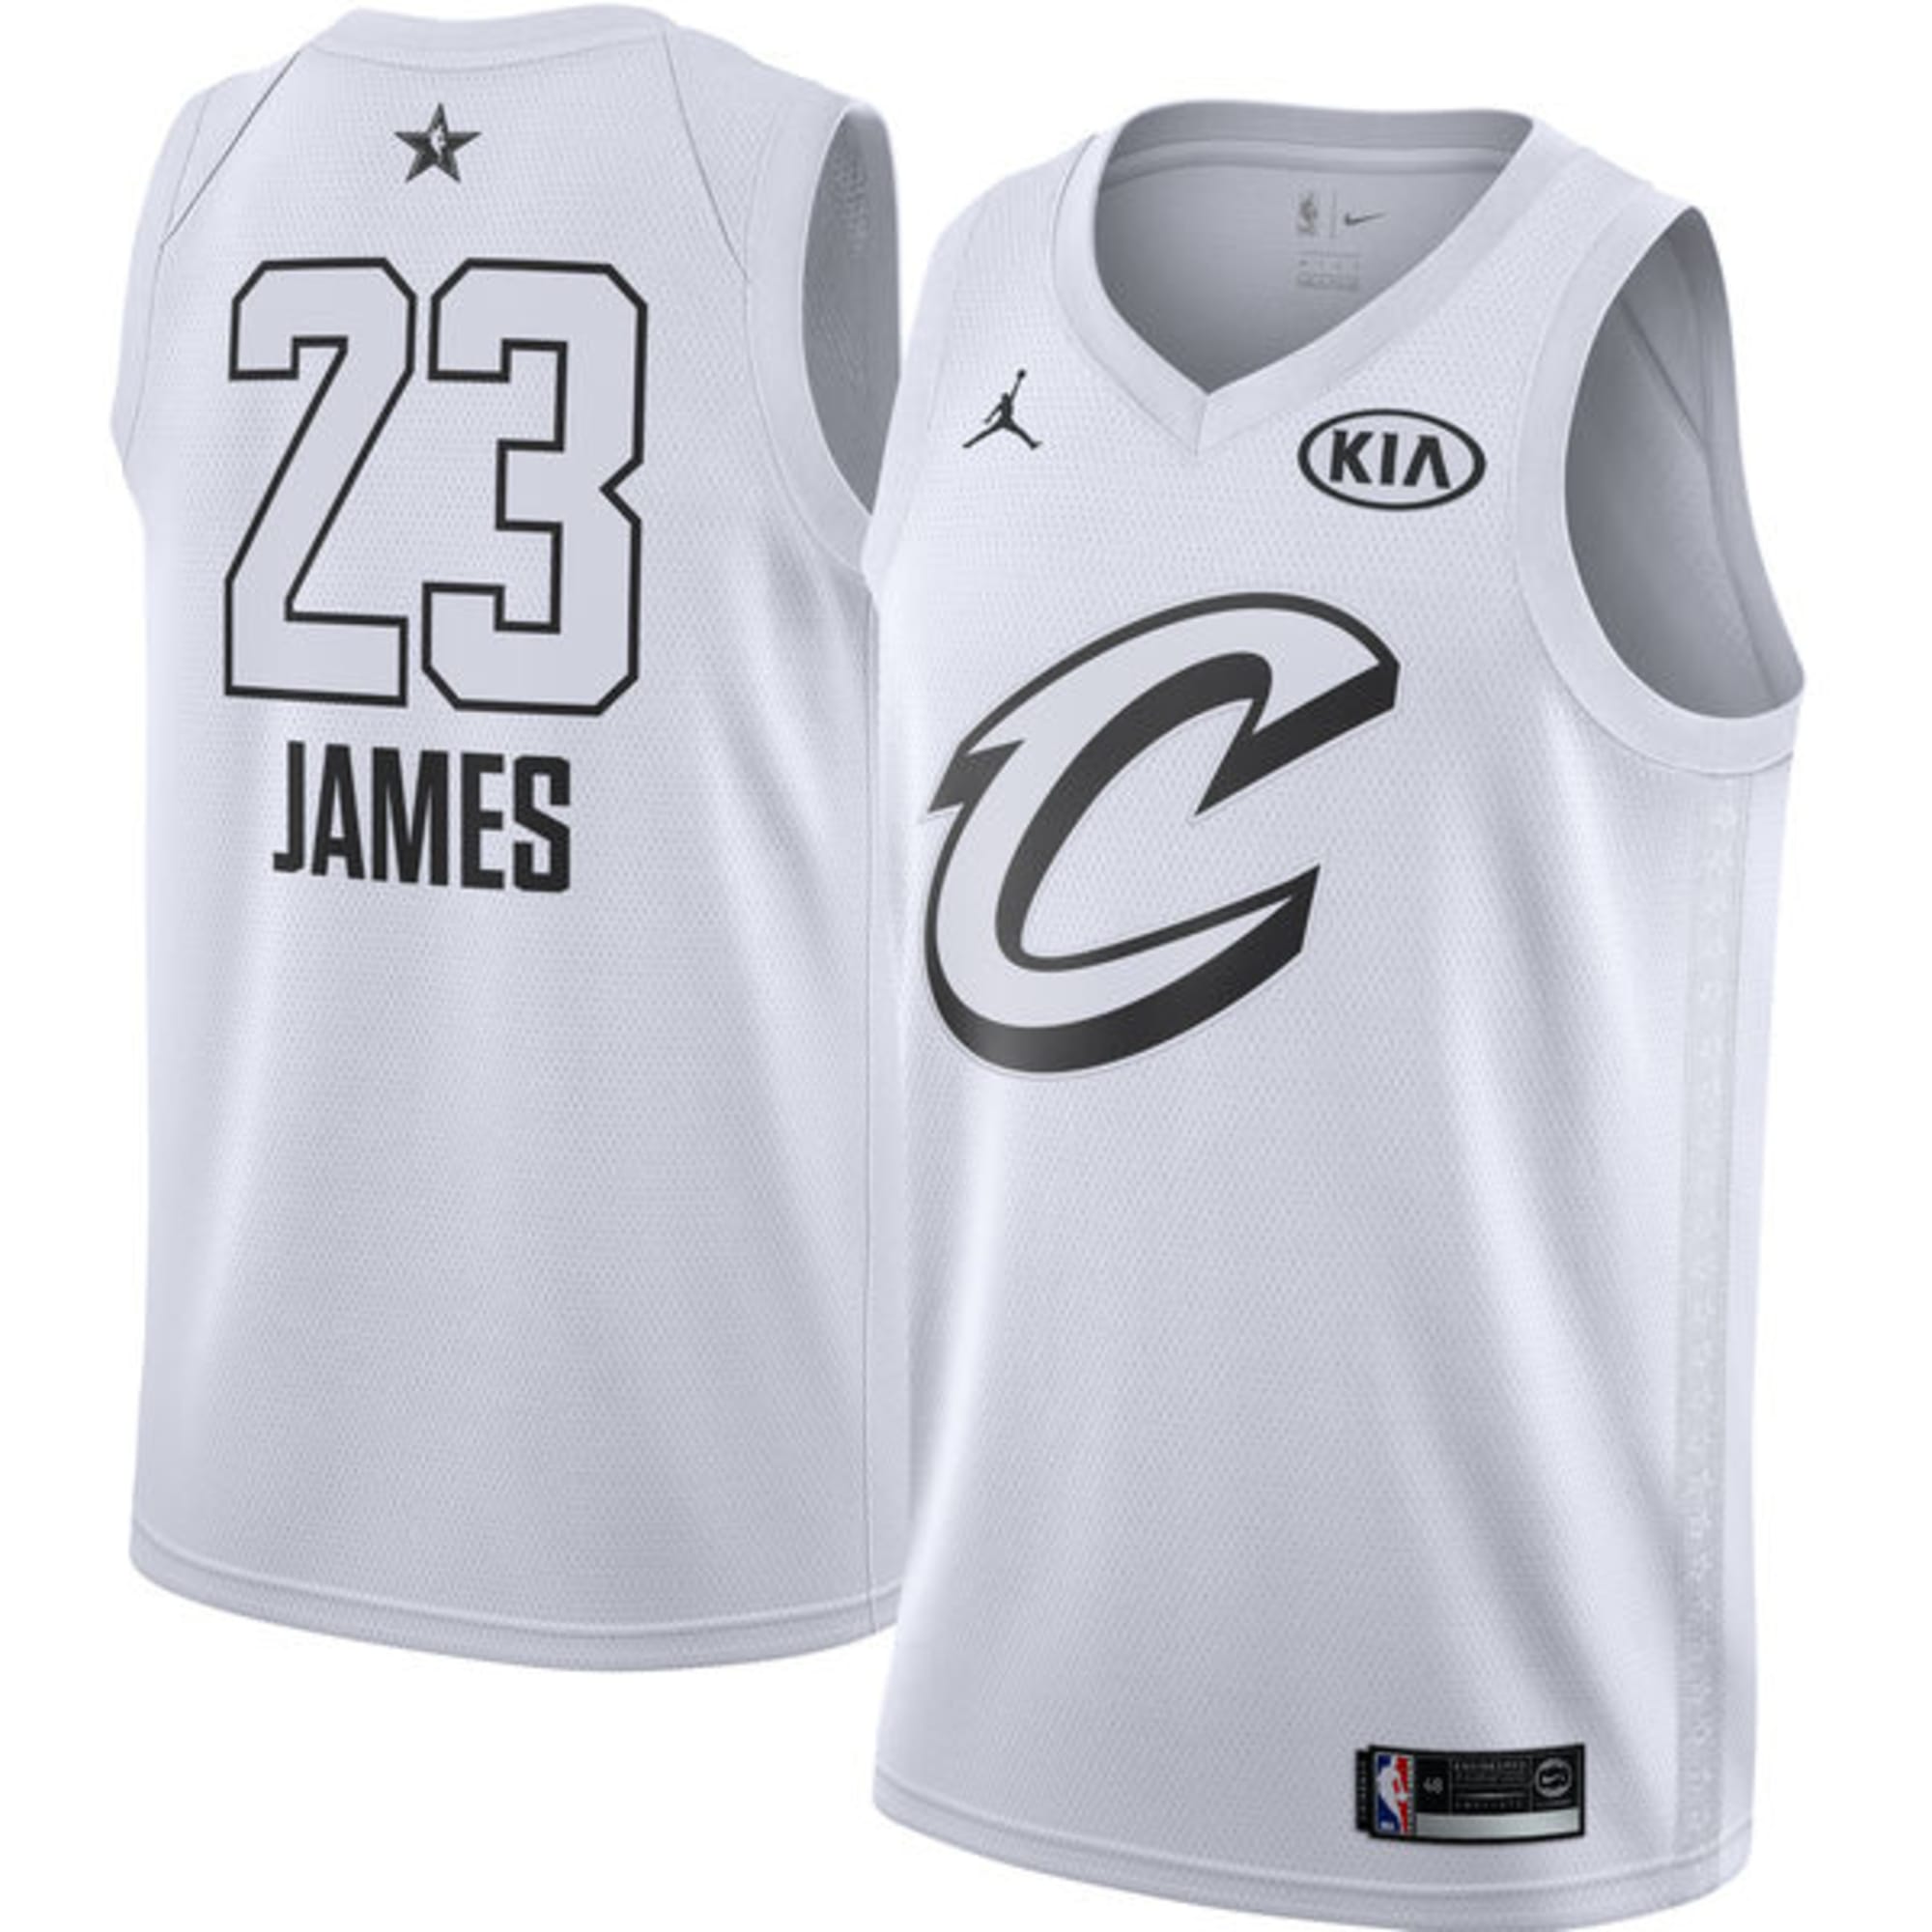 NBA All-Star Game Merchandise Gift Guide